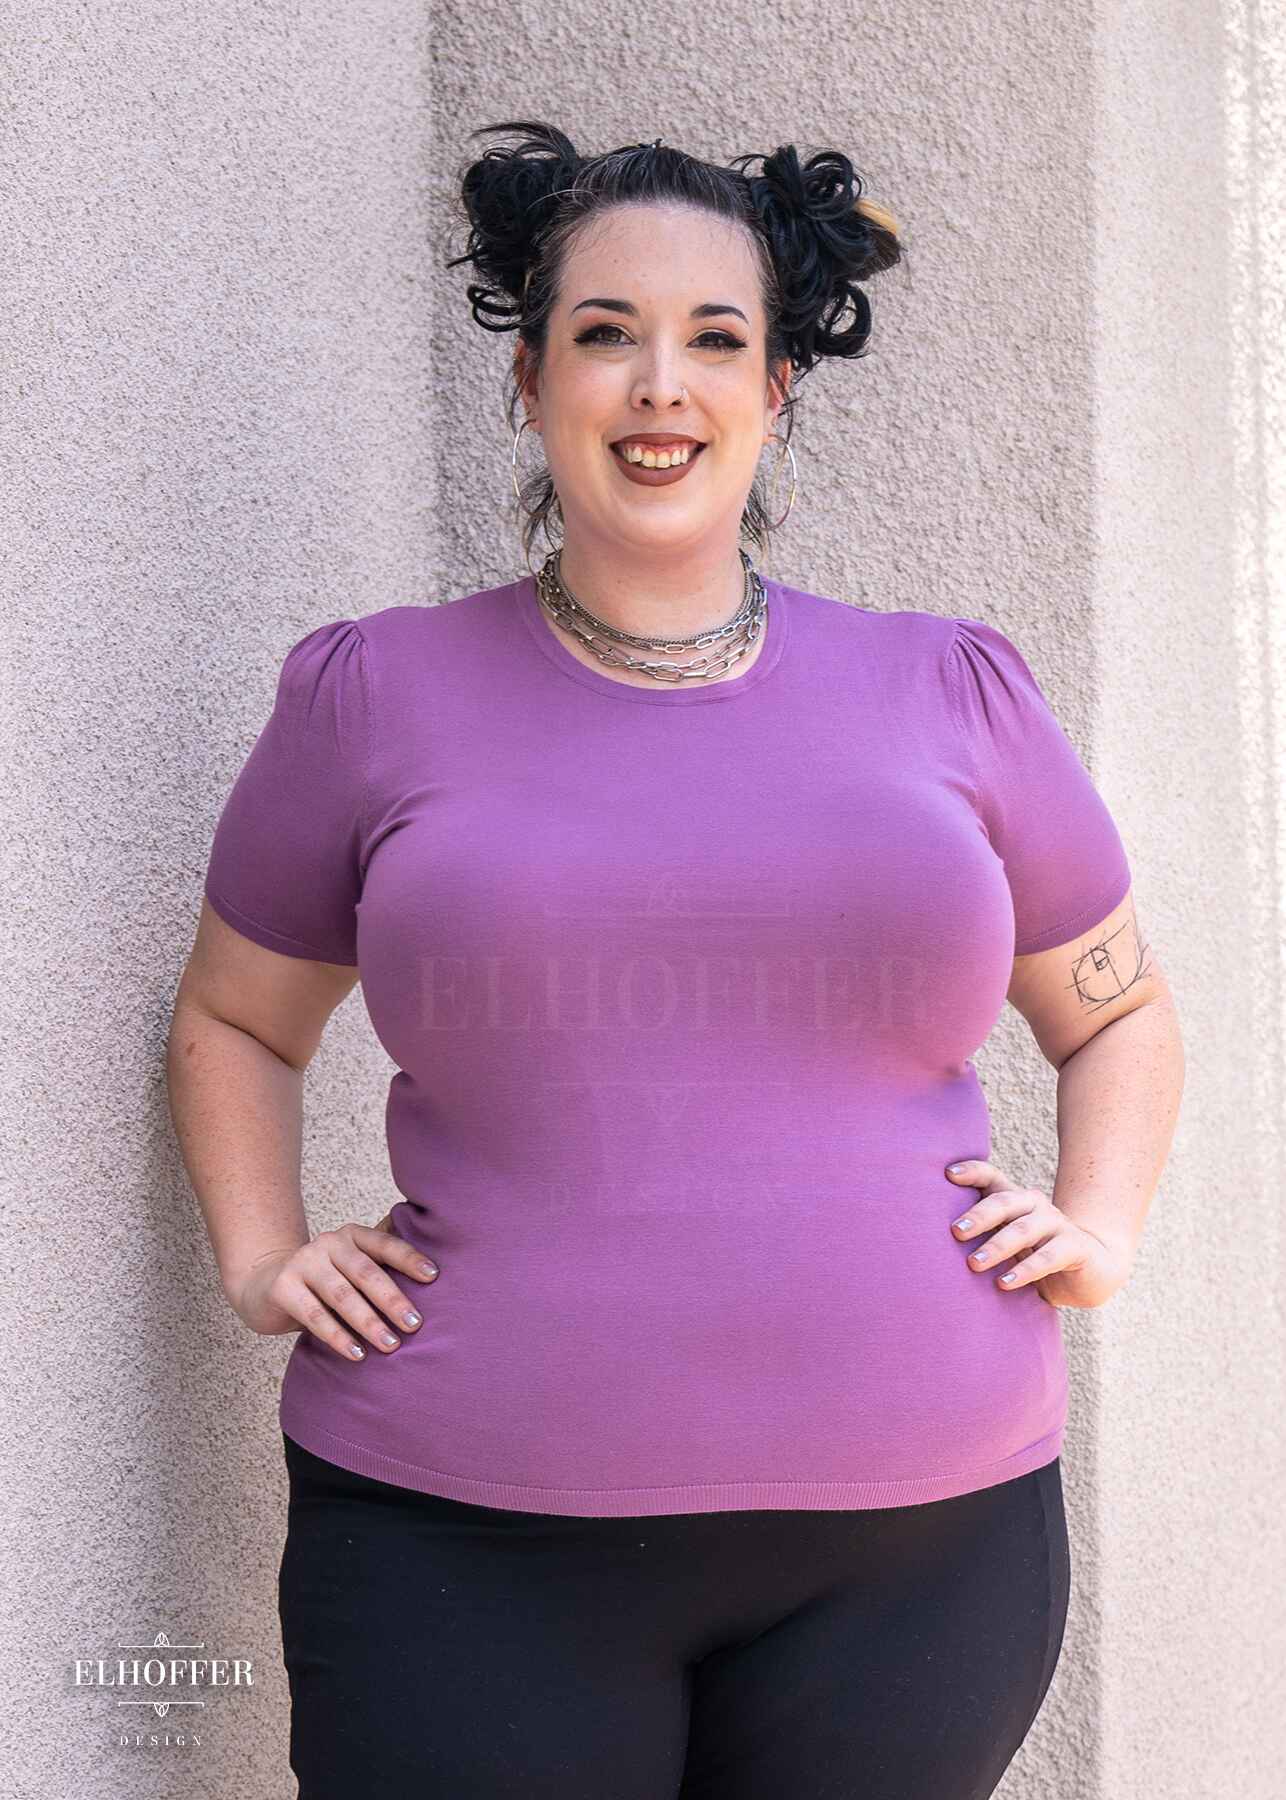 Katie Lynn, a fair skinned 2xl model with dark hair in space buns, is smiling while wearing a short sleeve light weight soft purple knit top. The top hits about mid hip in length and the sleeves have pleated gathering at the shoulders.